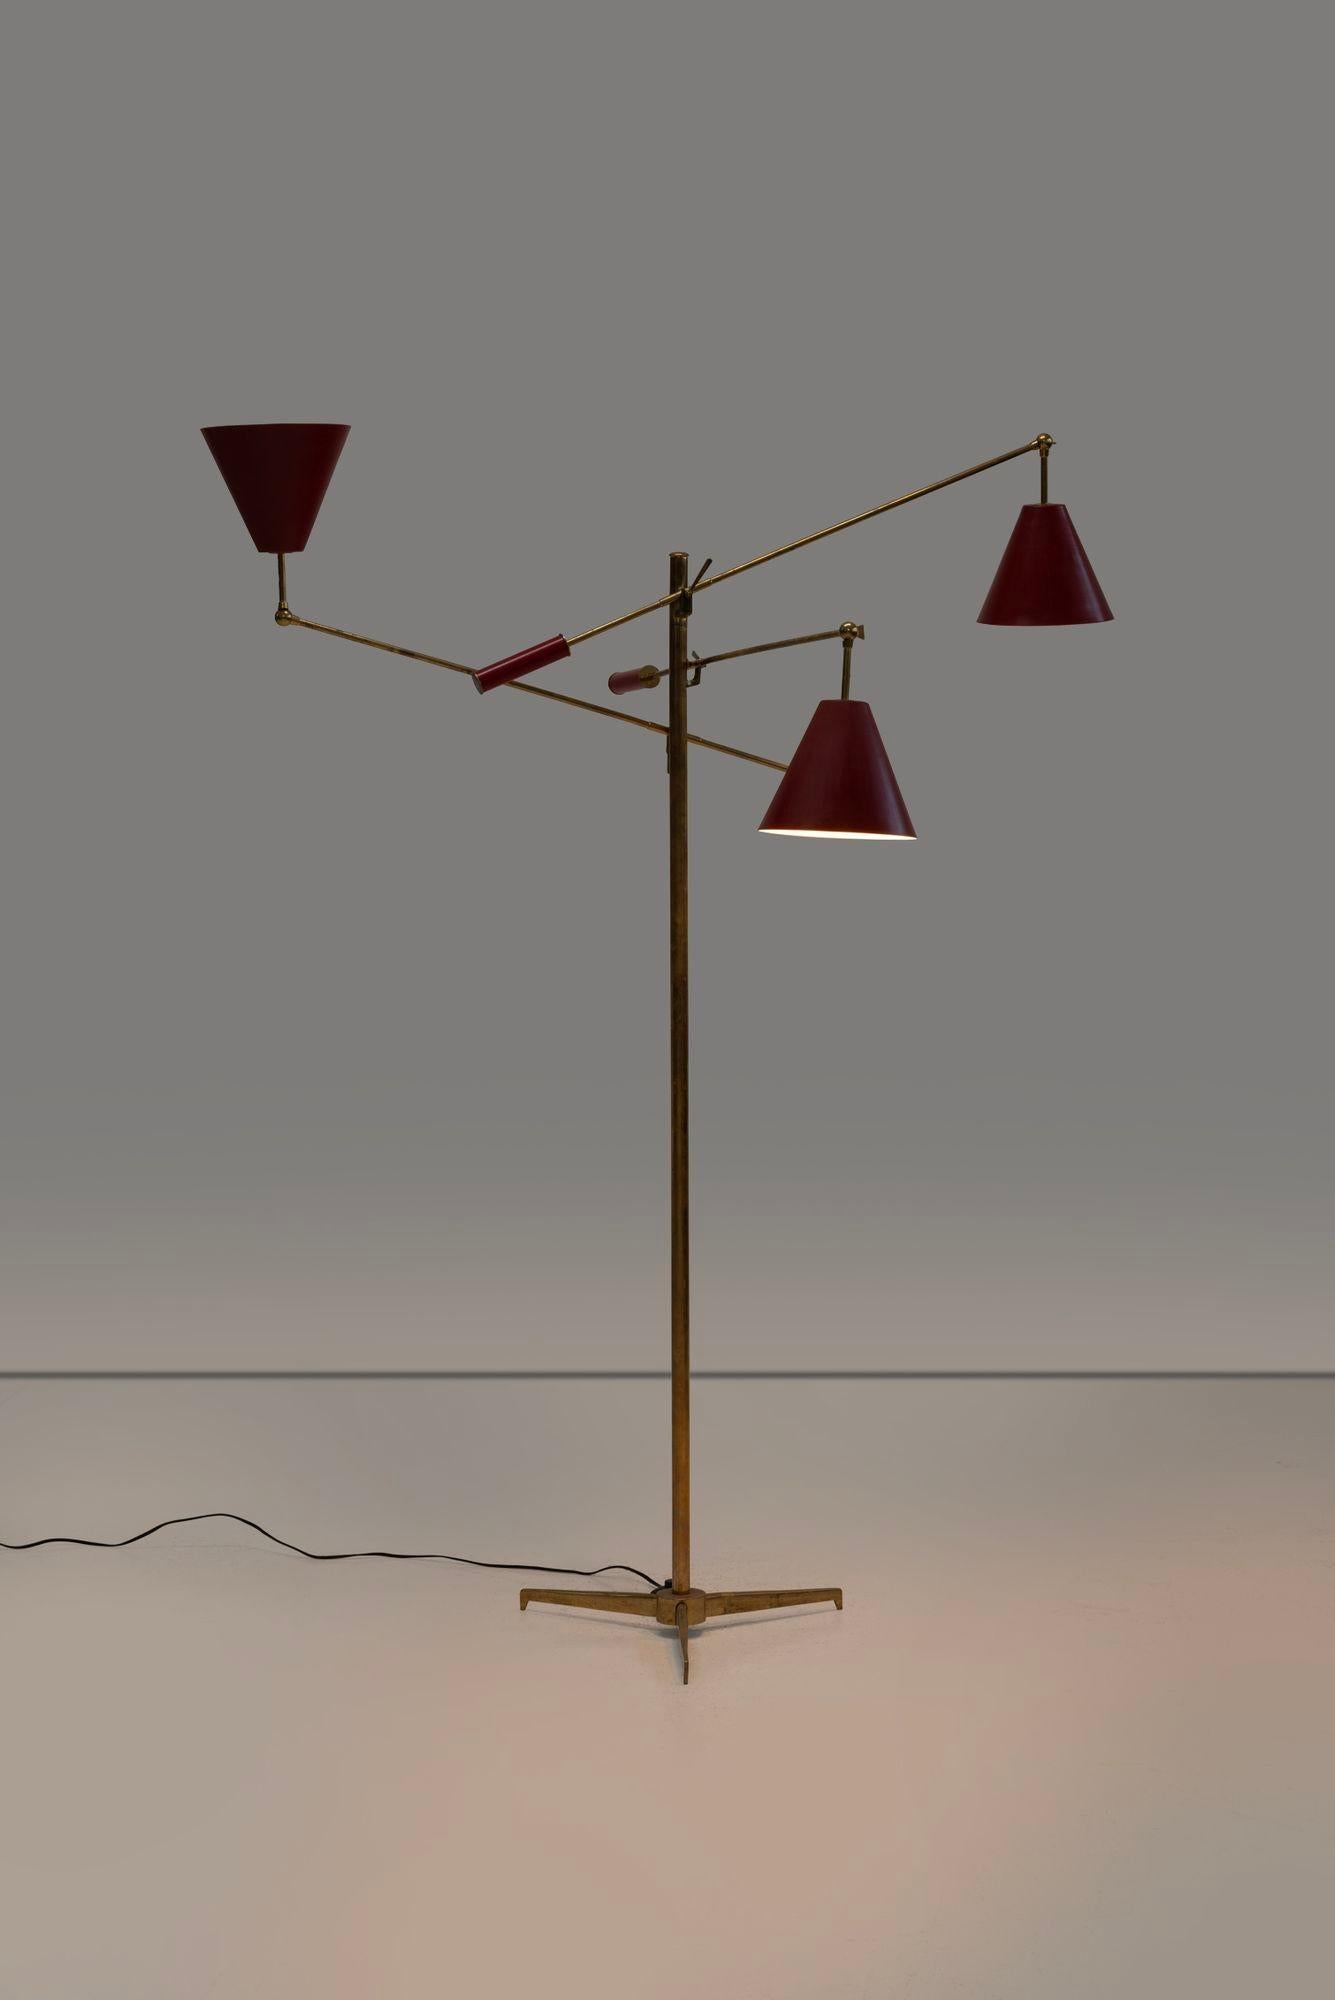 Angelo Lelii for Arredoluce Triennale Floor Lamp, model 12128 Italy, 1947
An original Brass frame on a tripod base with painted shades of enameled steel adjustable handles impressed the manufacturer's monogram to end cap on each pommel